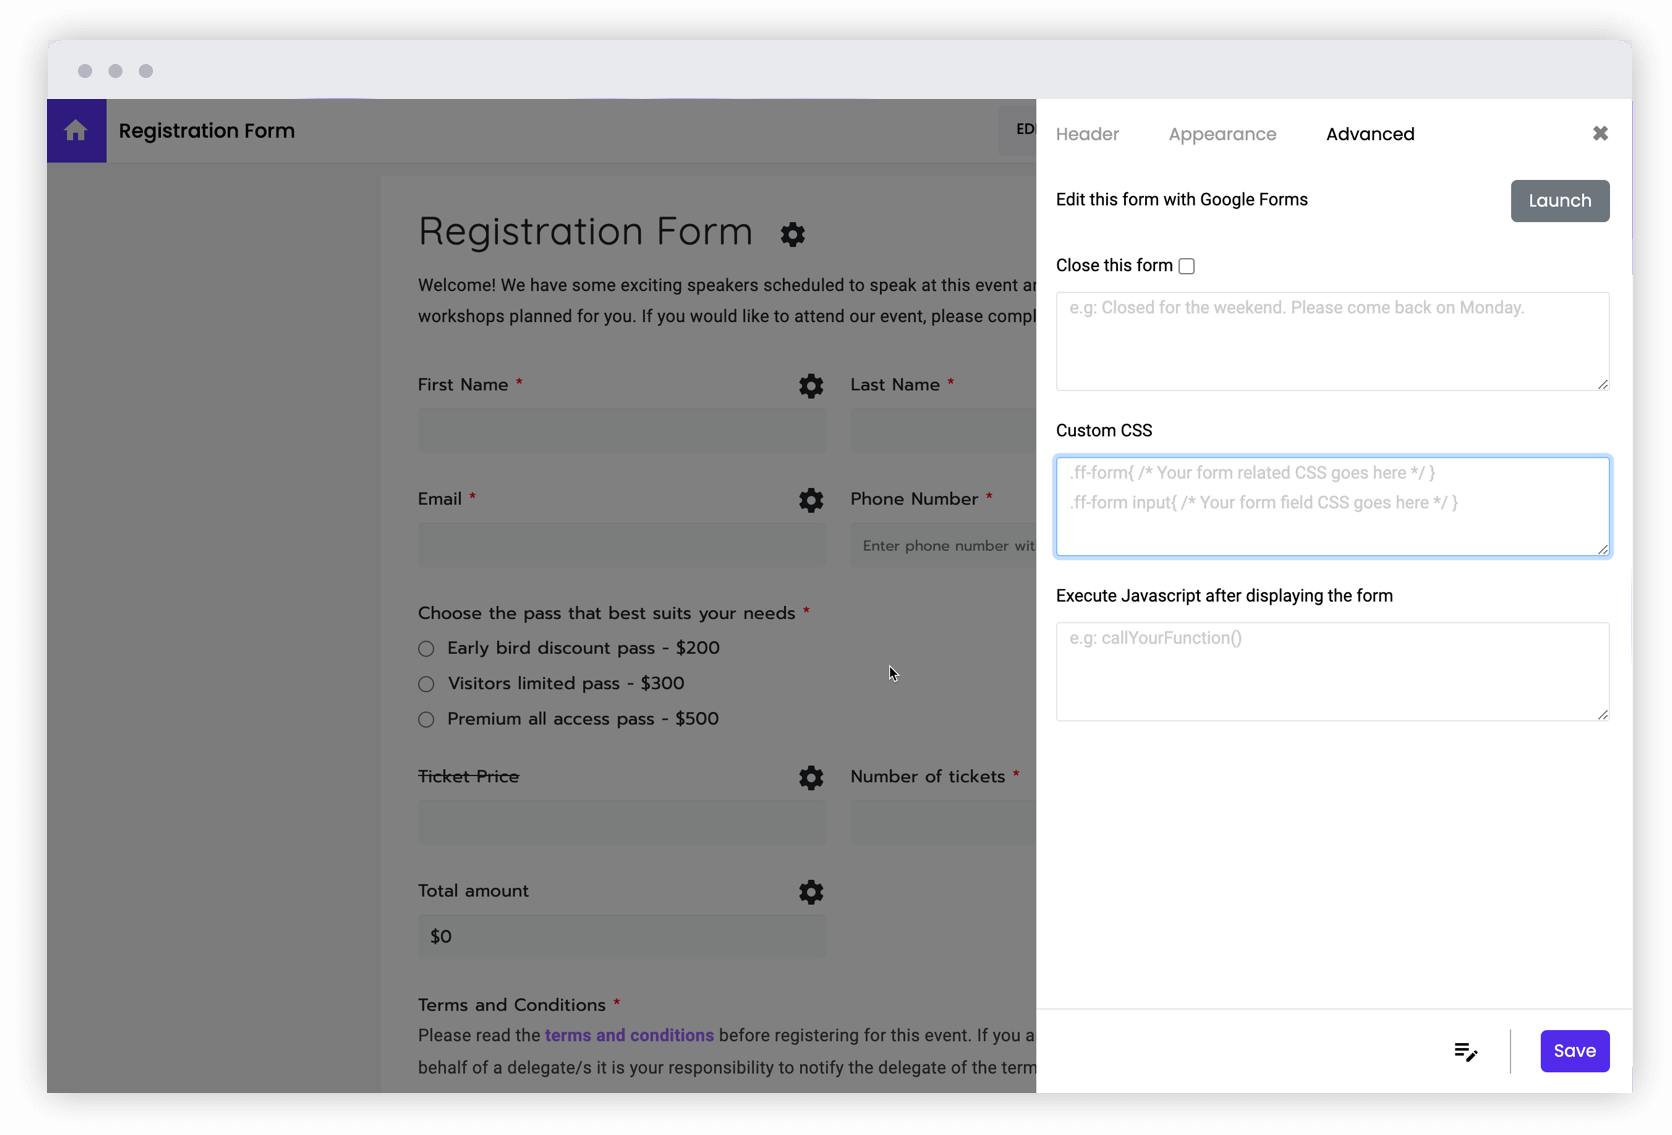 Add custom css to further customize the form and style individual form elements as per your needs